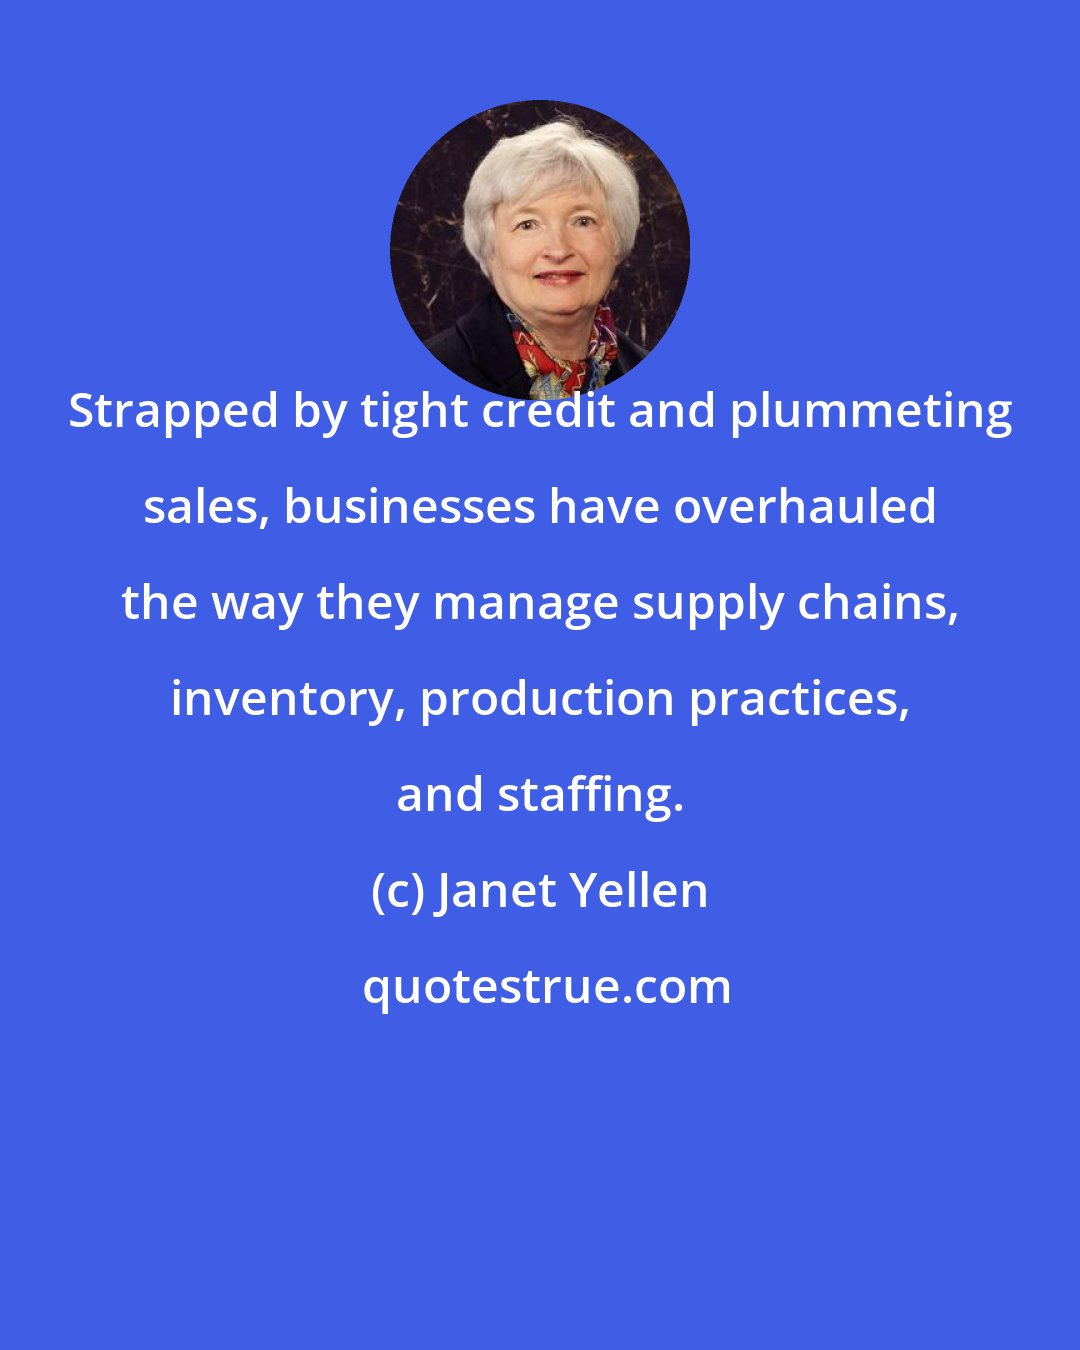 Janet Yellen: Strapped by tight credit and plummeting sales, businesses have overhauled the way they manage supply chains, inventory, production practices, and staffing.